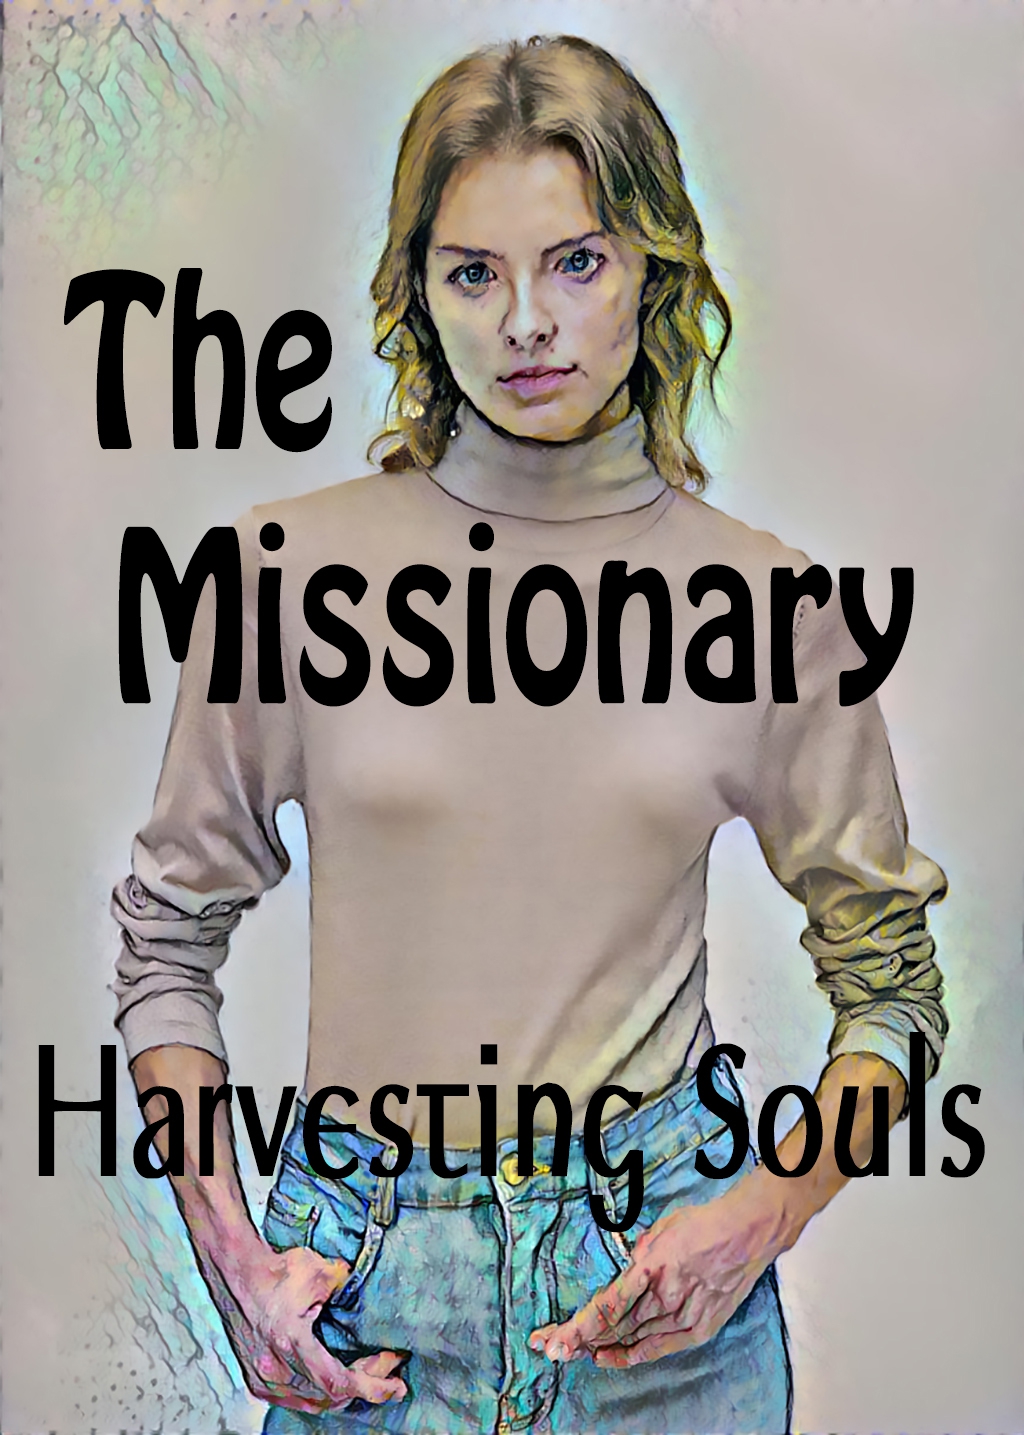 The Missionary is a slender, maybe even skinny short coiffed blond female given to turtlenecks and jeans.